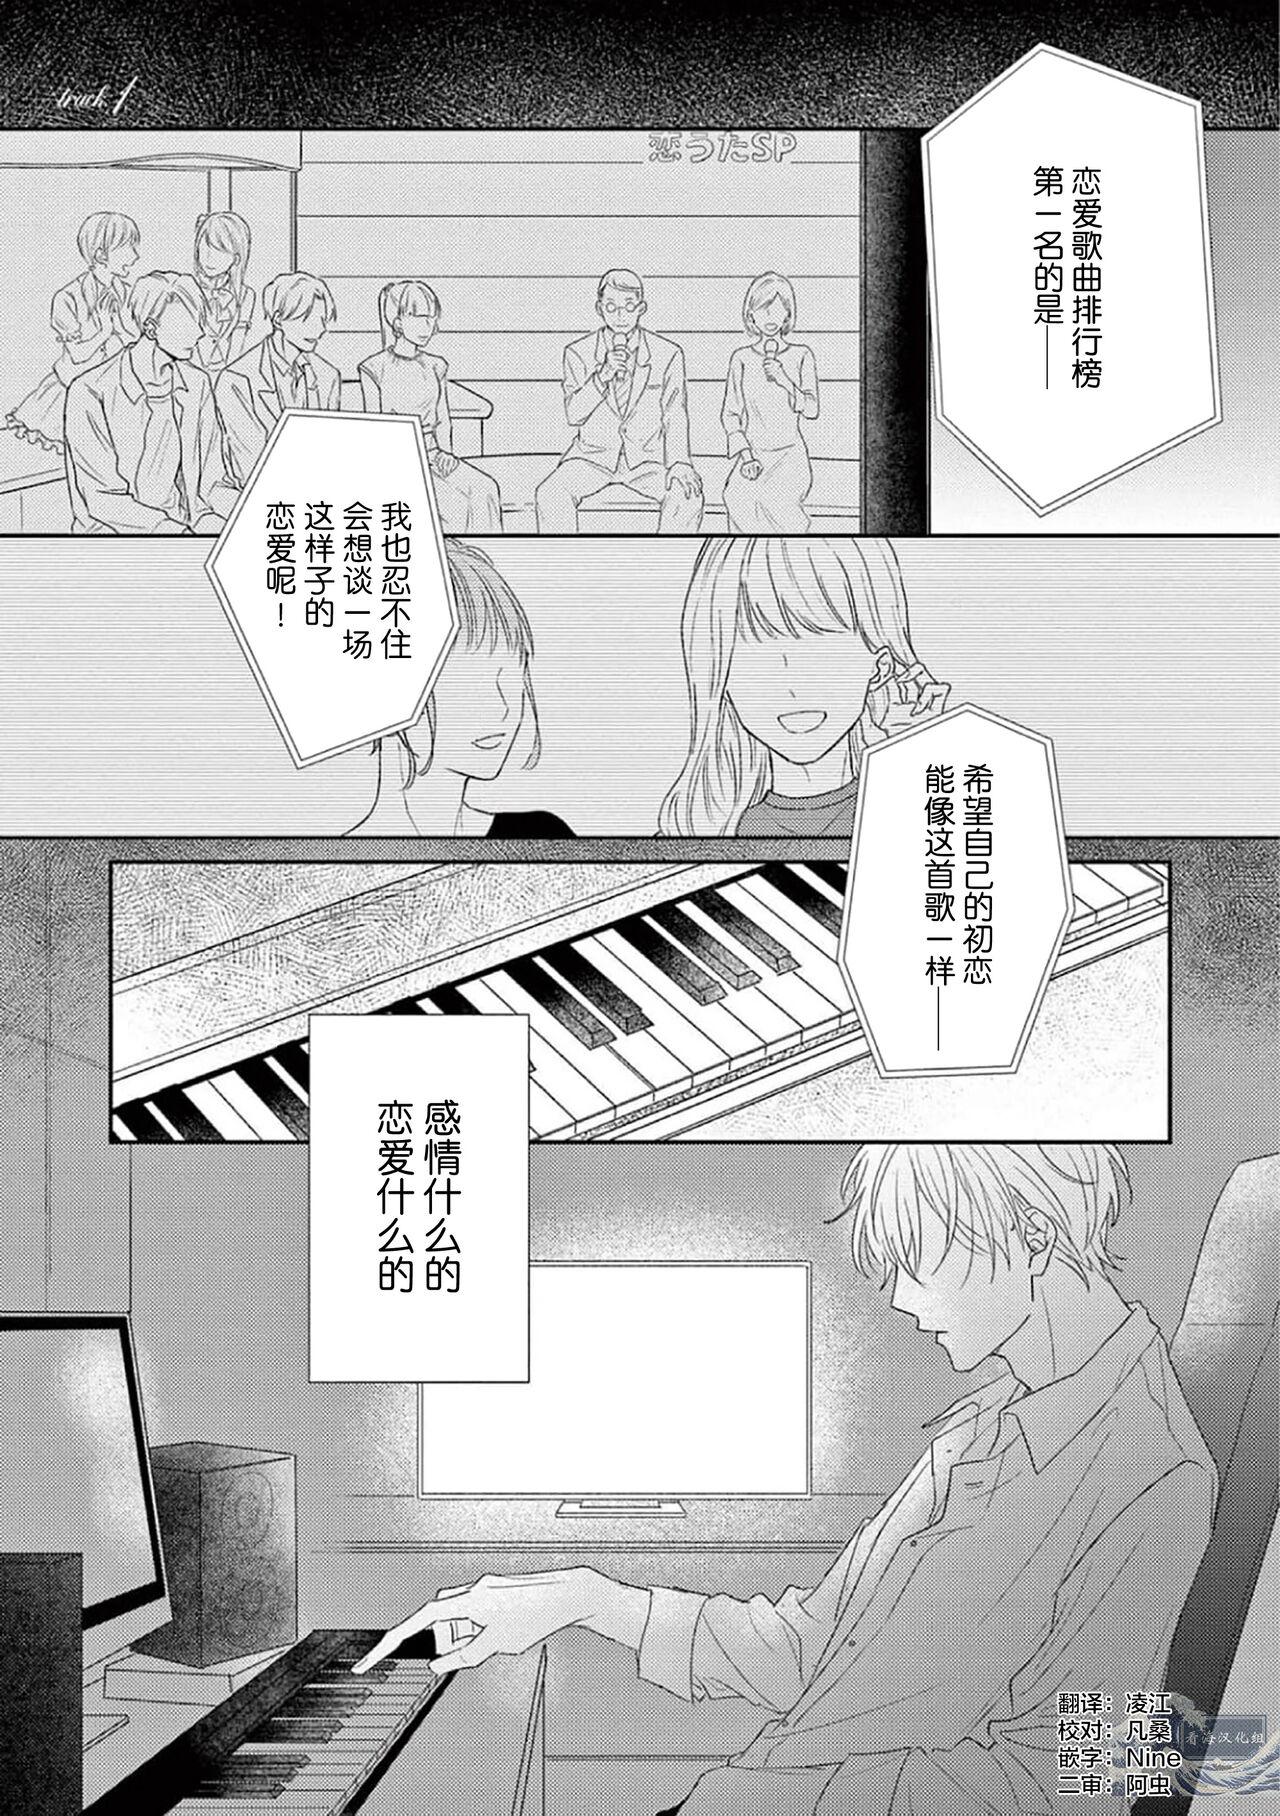 Urine Love Song ga Owaru made - Until The End of A Love Song | 直到这曲恋歌结束为止 Eurosex - Page 5